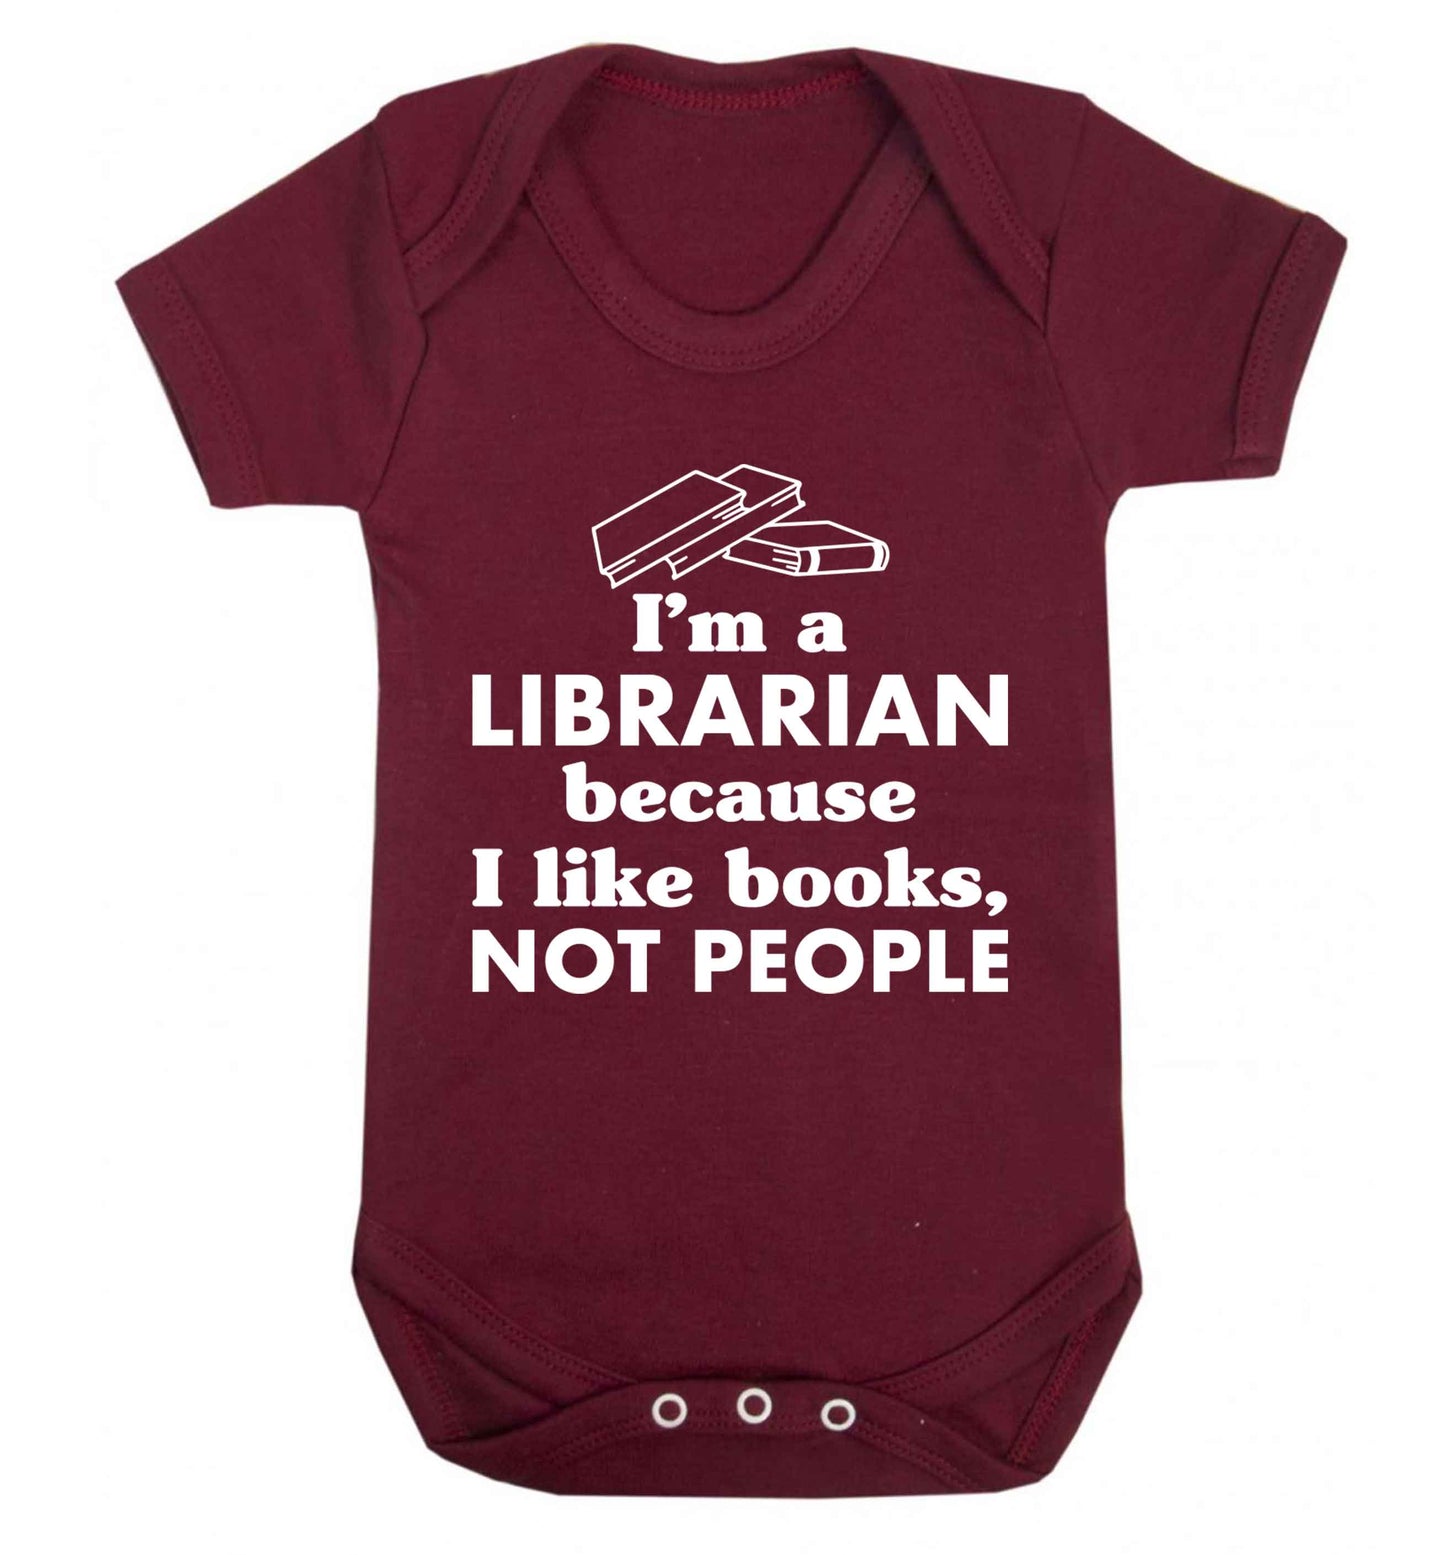 I'm a librarian because I like books not people Baby Vest maroon 18-24 months